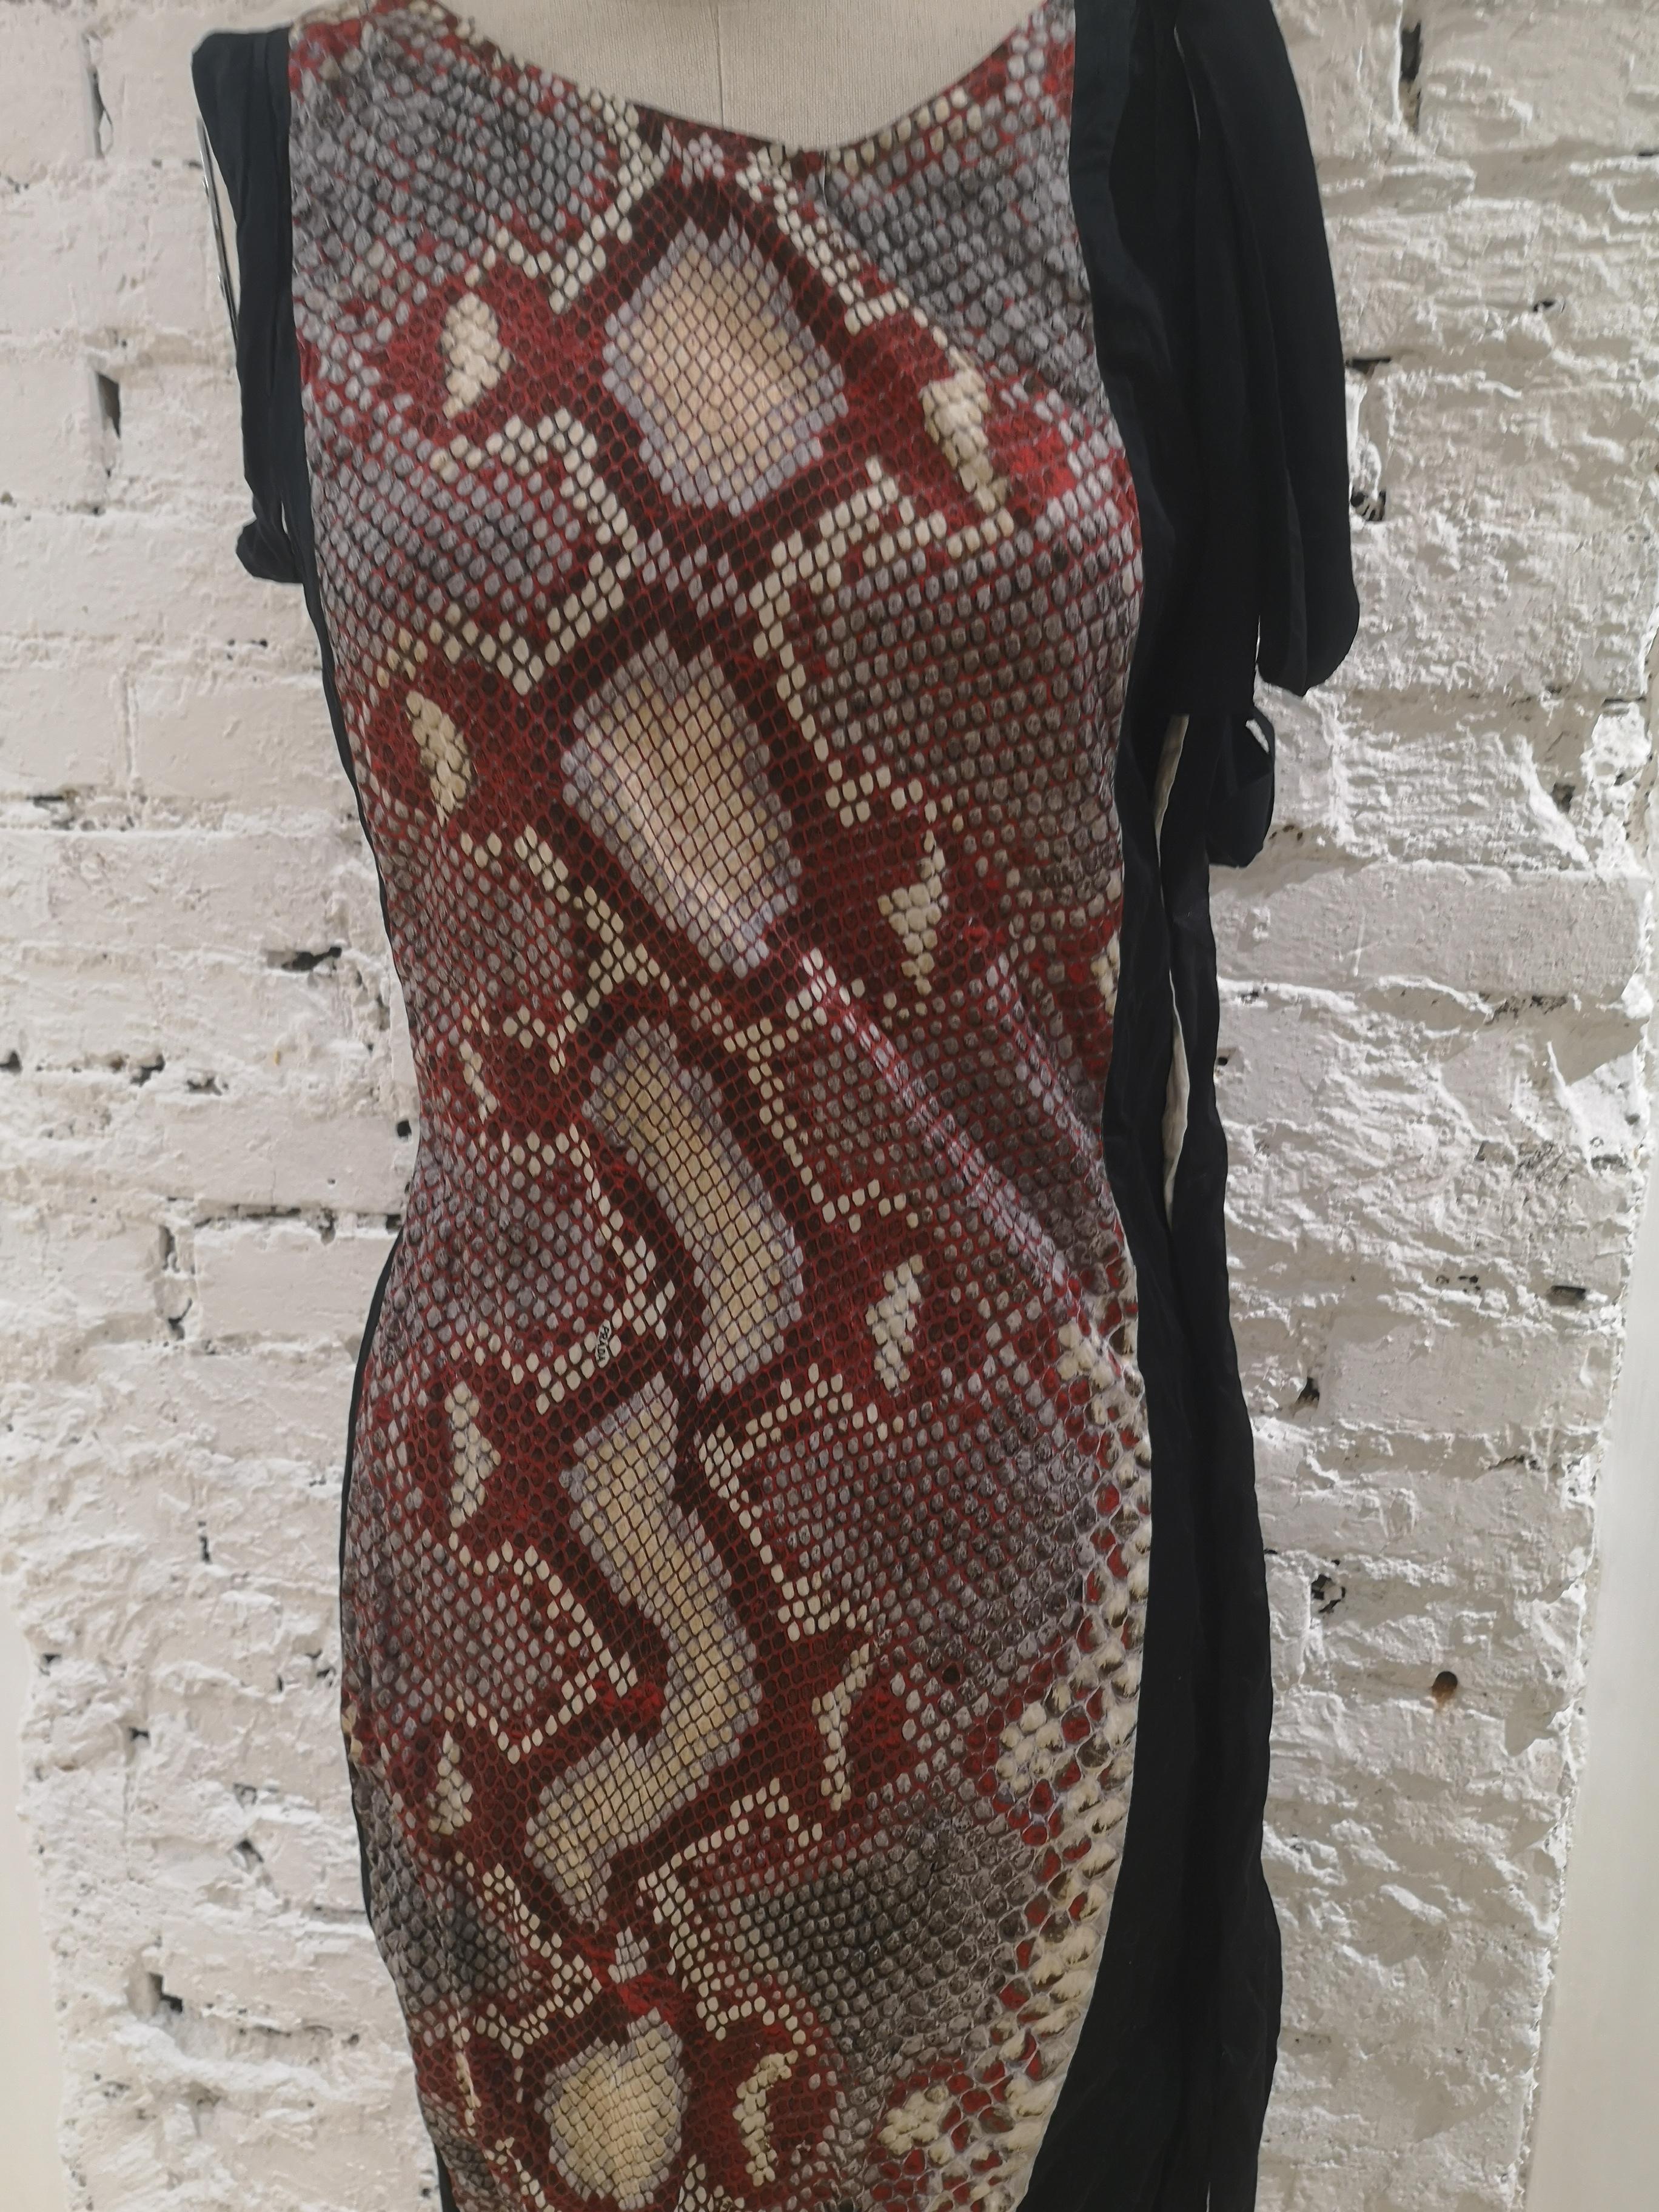 Prada Duchesse Antique Dress Snake print dress from Prada Runway collection
Totally made in italy in a wrinkled fabric made of cotton and metal
embellished with black ribbons on one side of the dress
Size 38